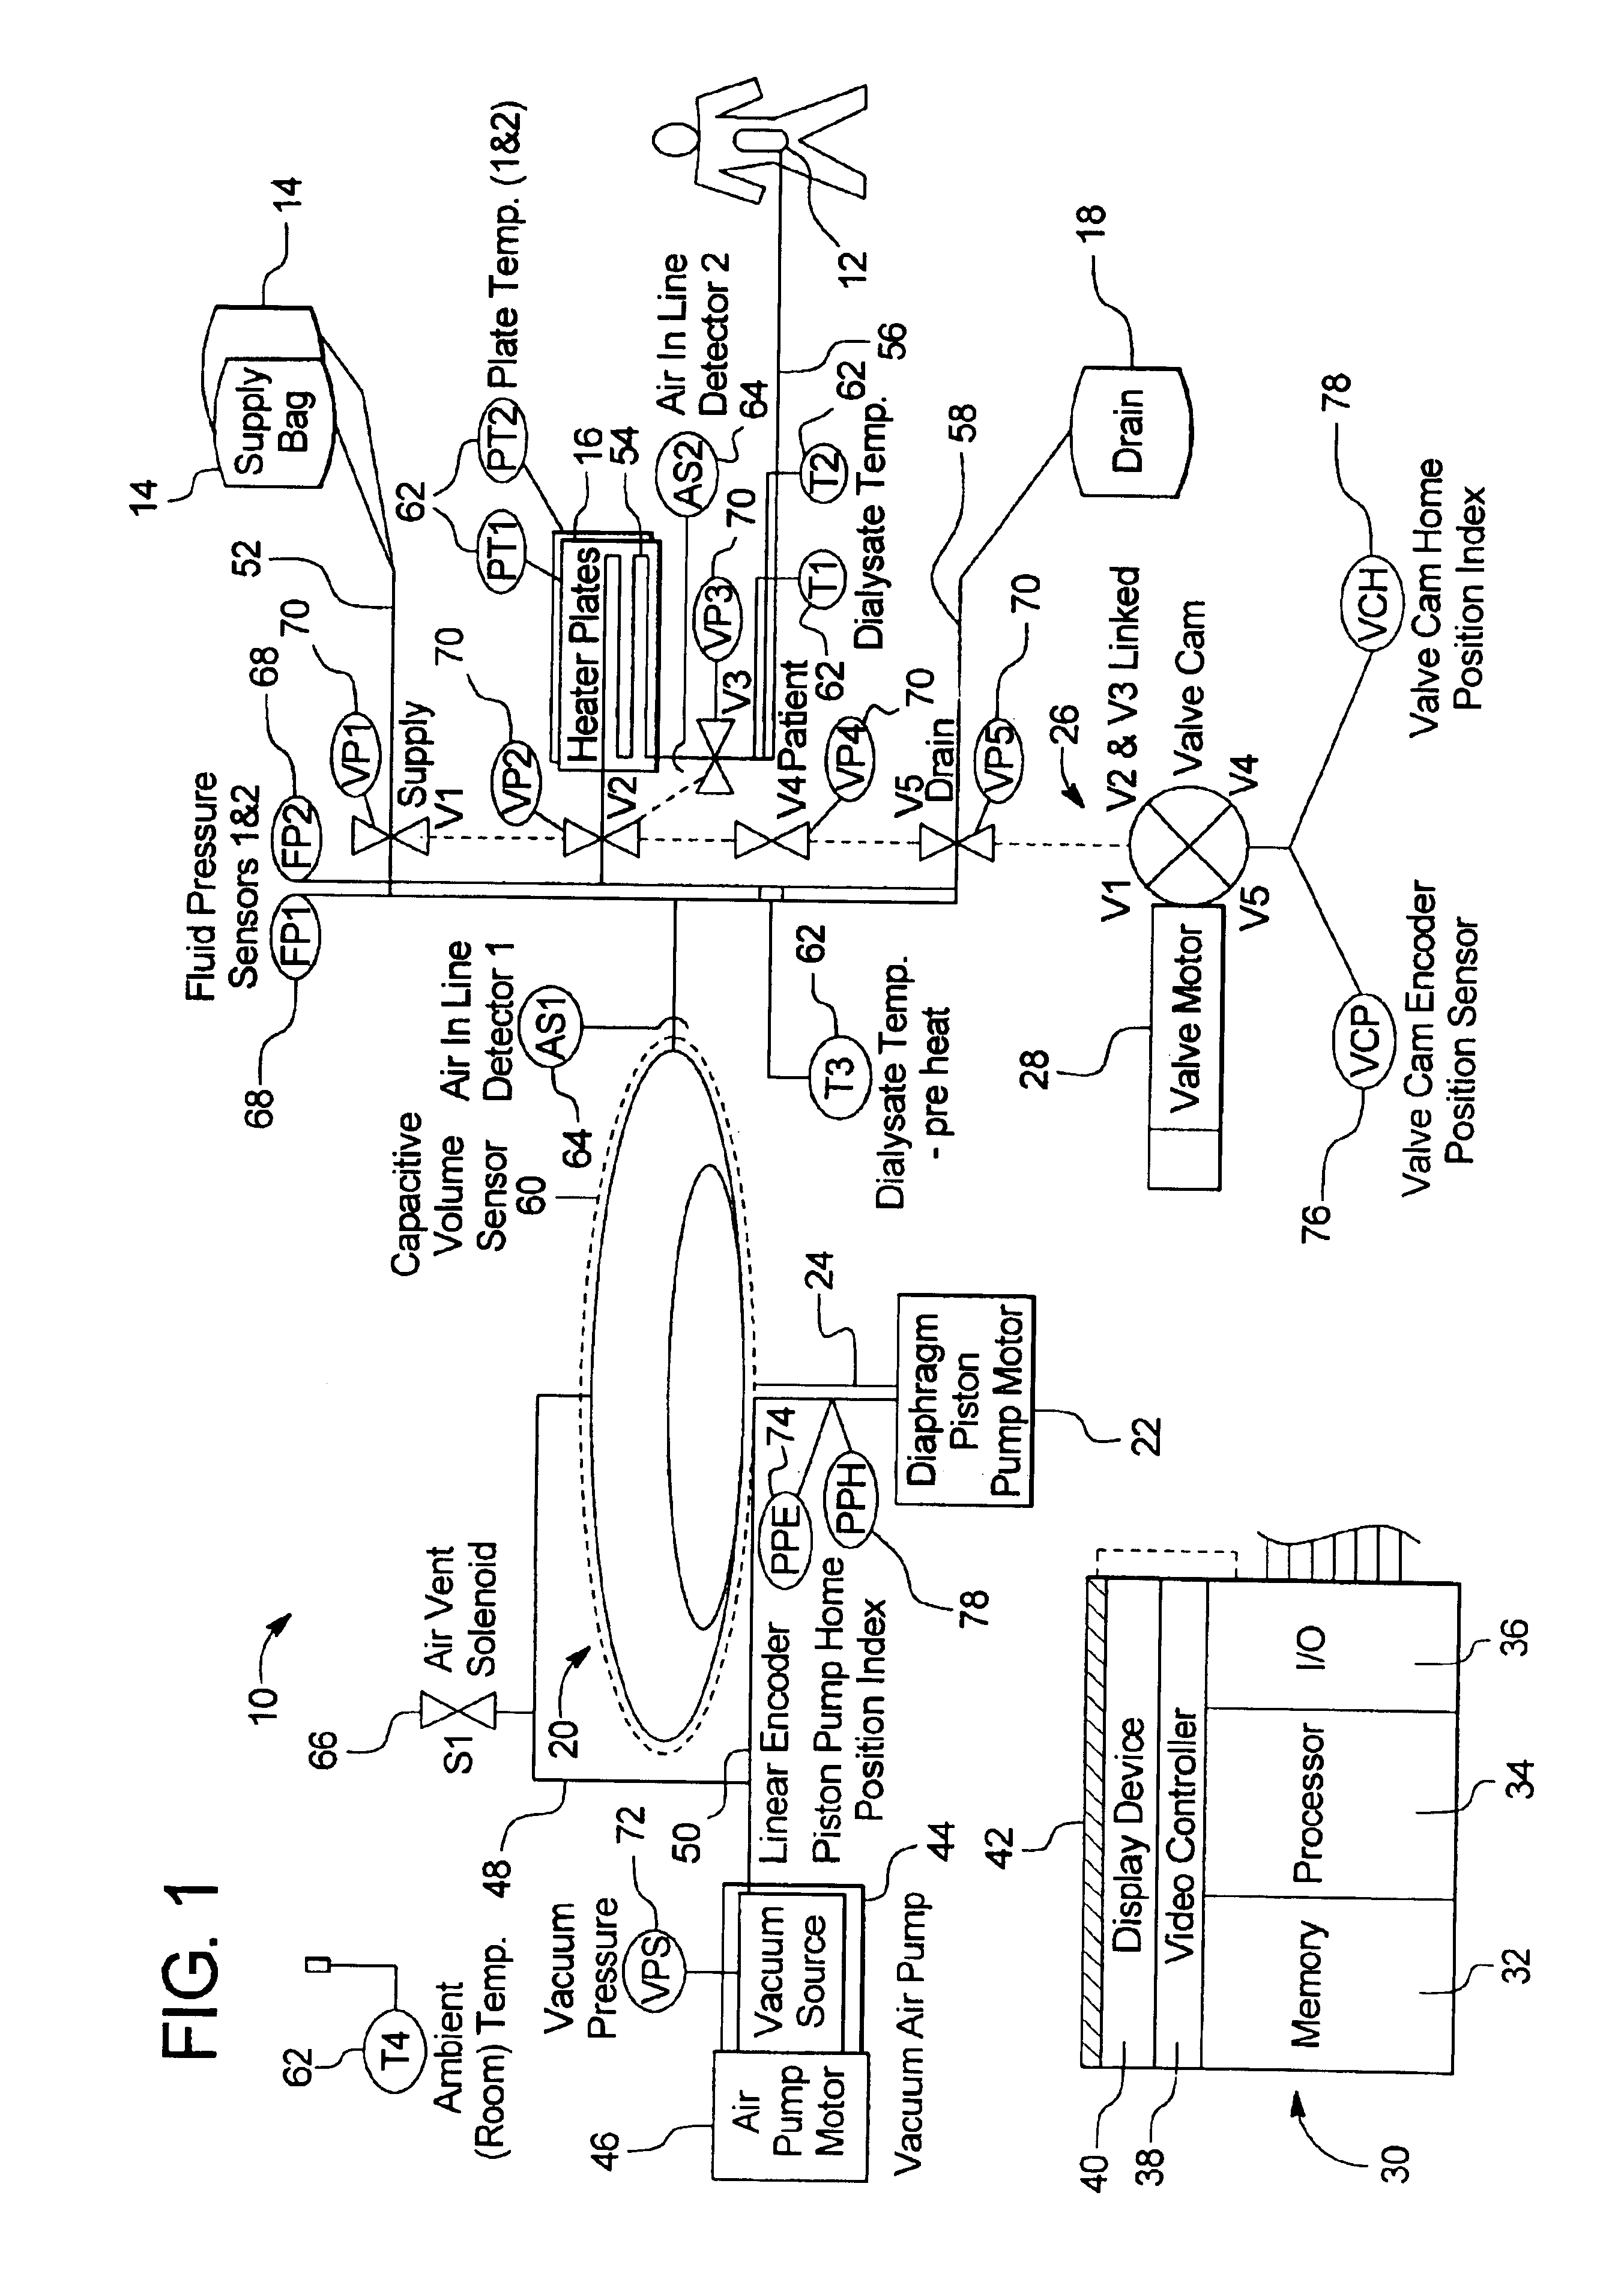 Method and apparatus for controlling a medical fluid heater